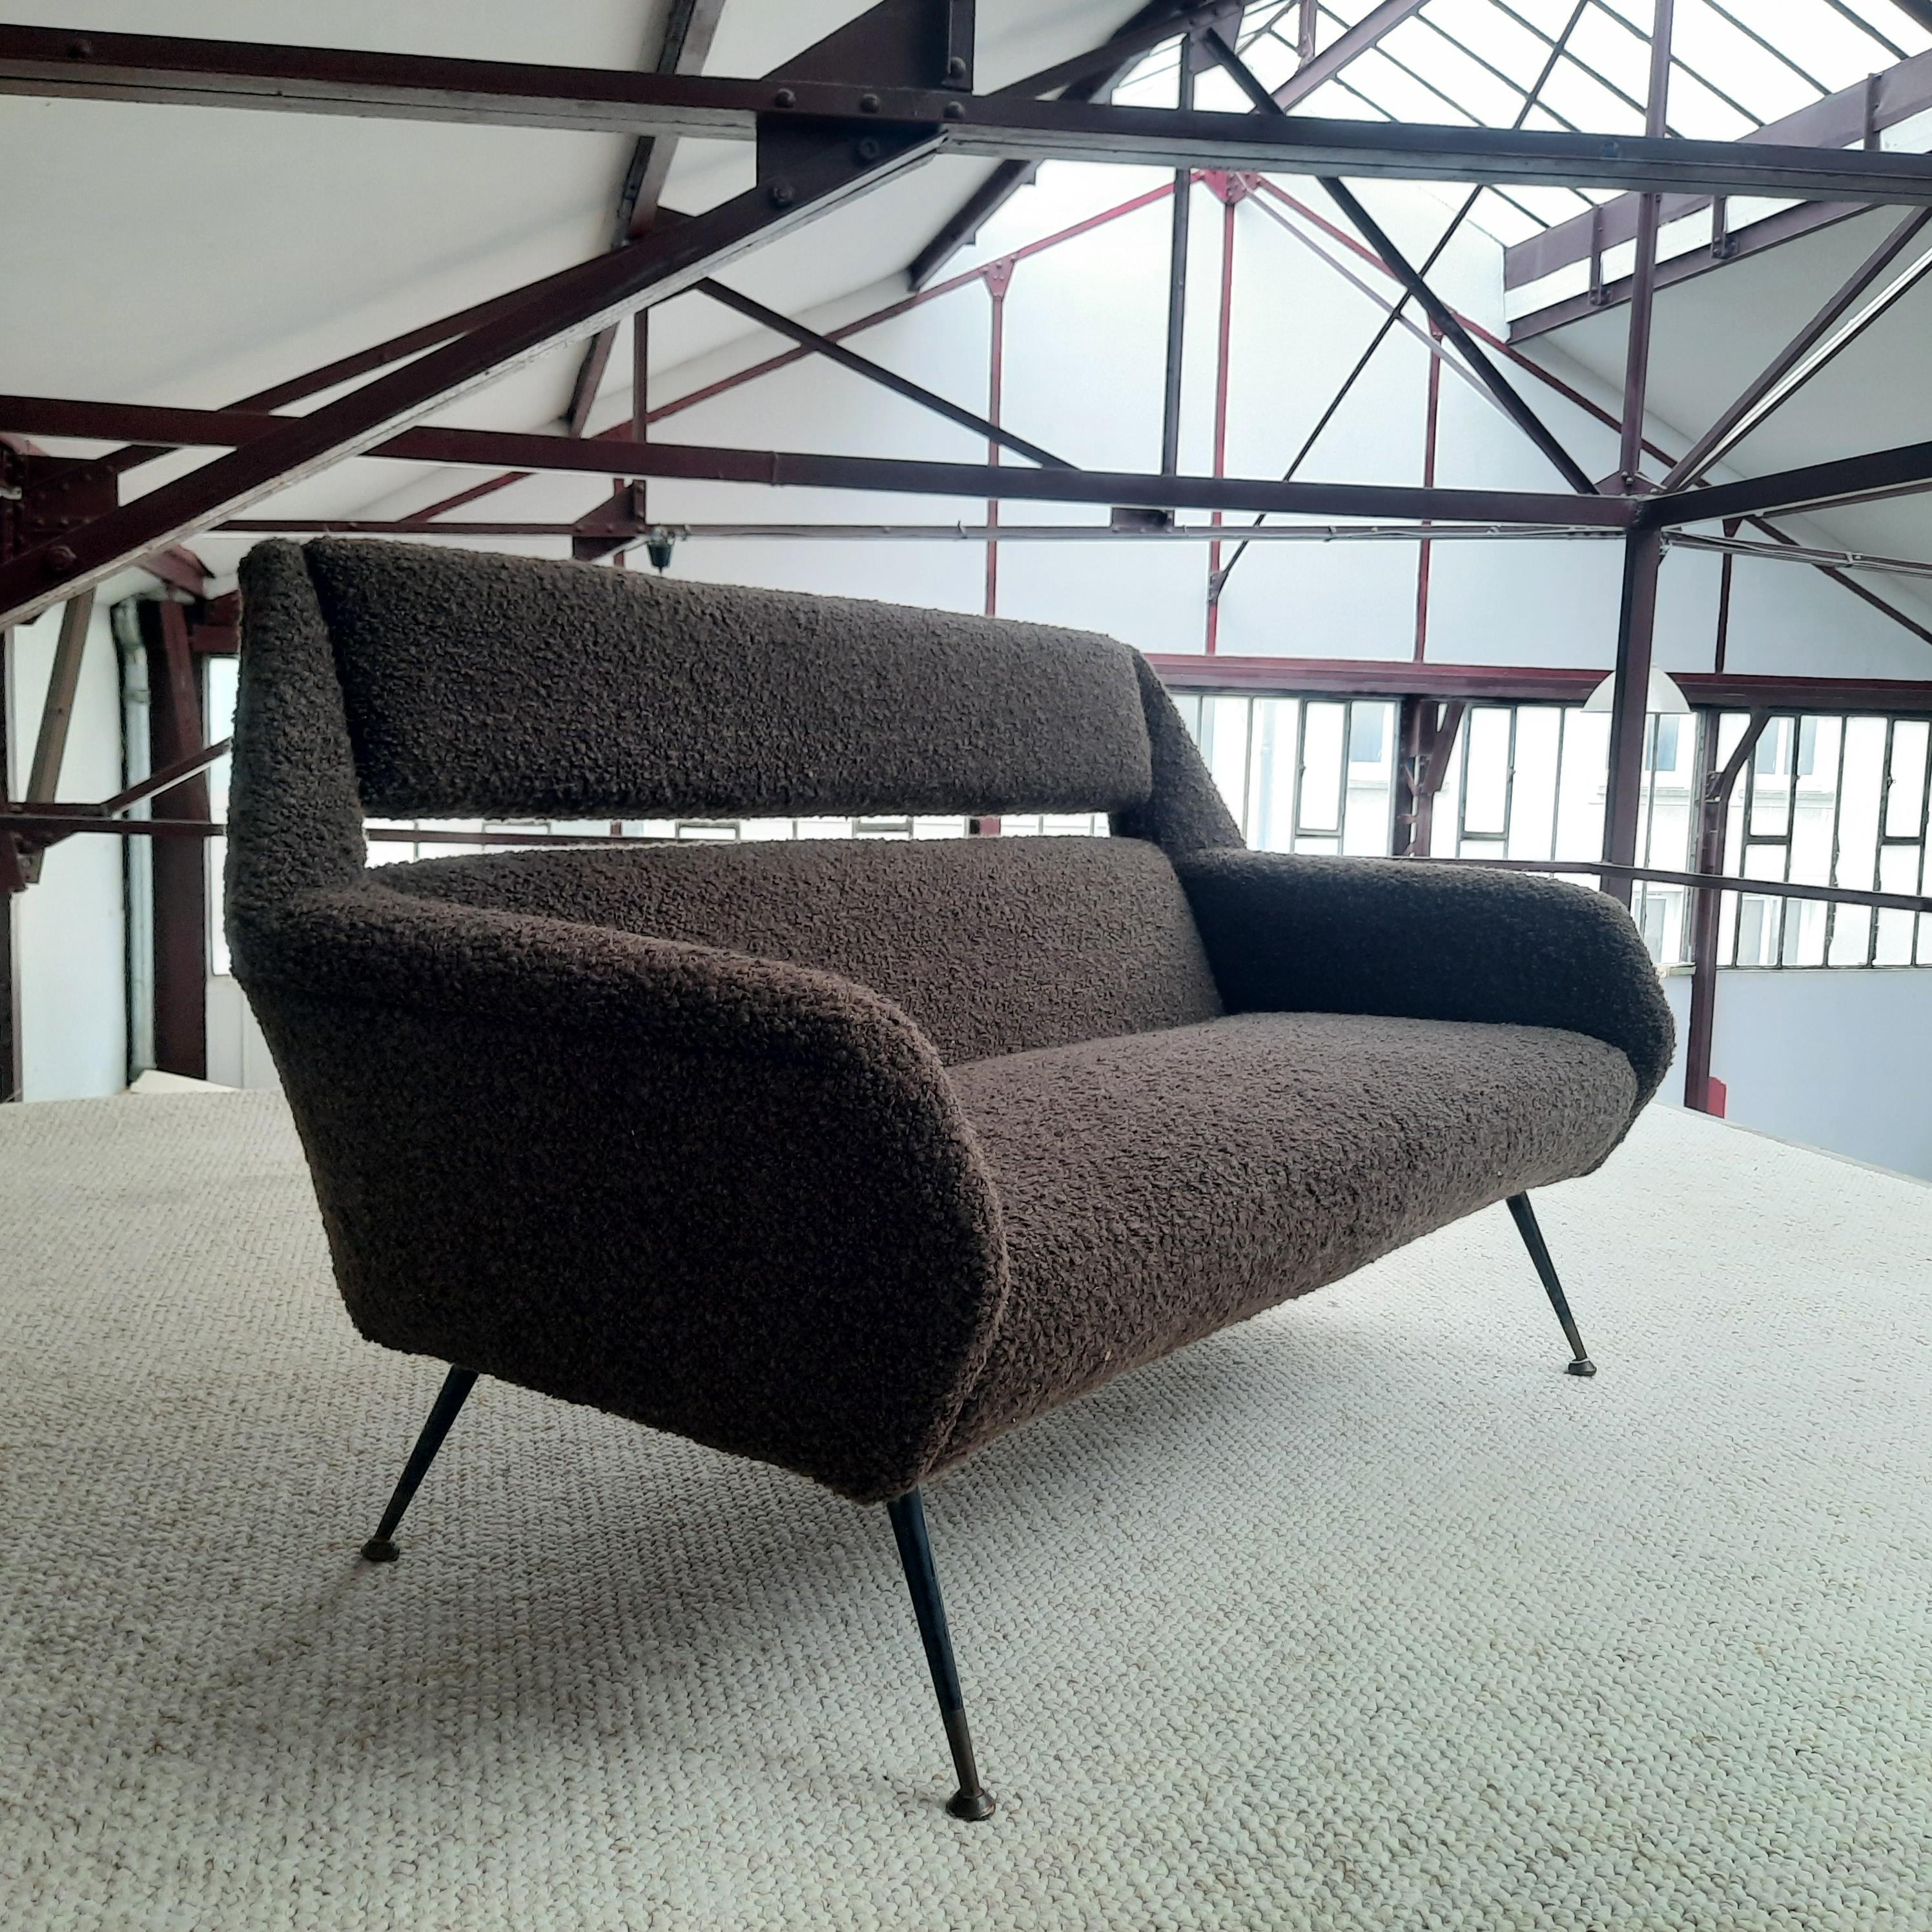 Italian sofa from the 1950s, in the style of Marco Zanuso. Original wooden structure, restored with a chocolate bouclé fabric from Designers Guild. Oblique metal base.